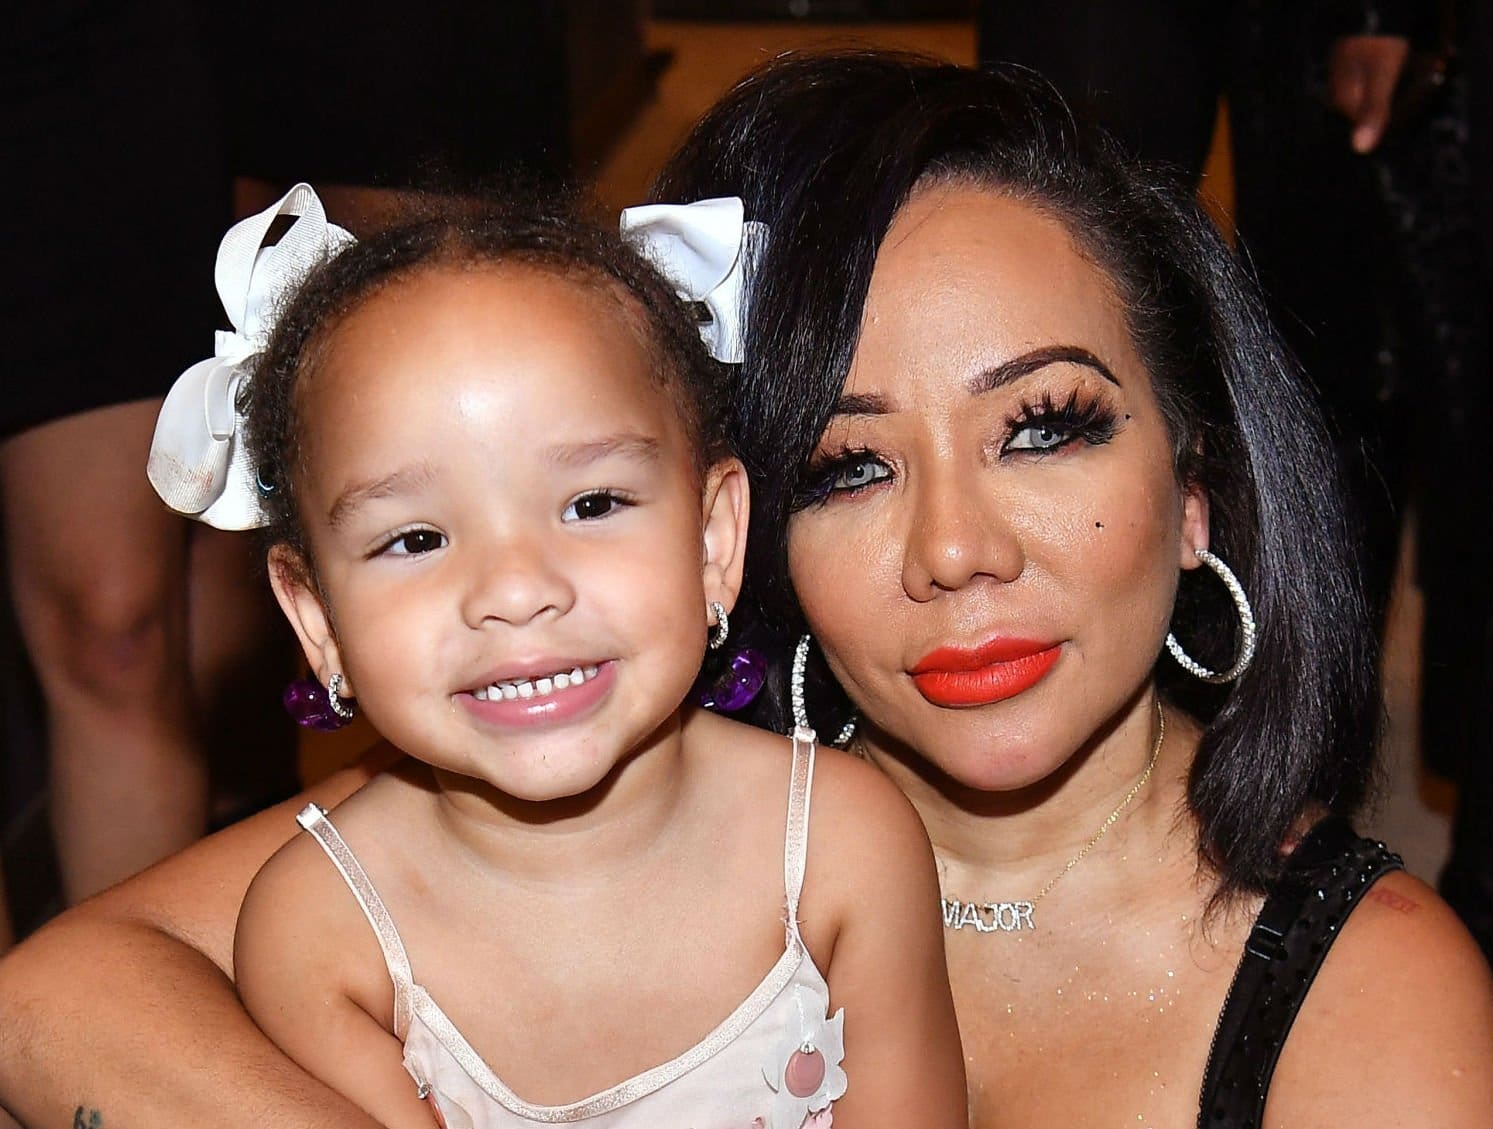 T.I. And Tiny Harris' Daughter, Heiress Harris' Graduation Video Will Make Your Day